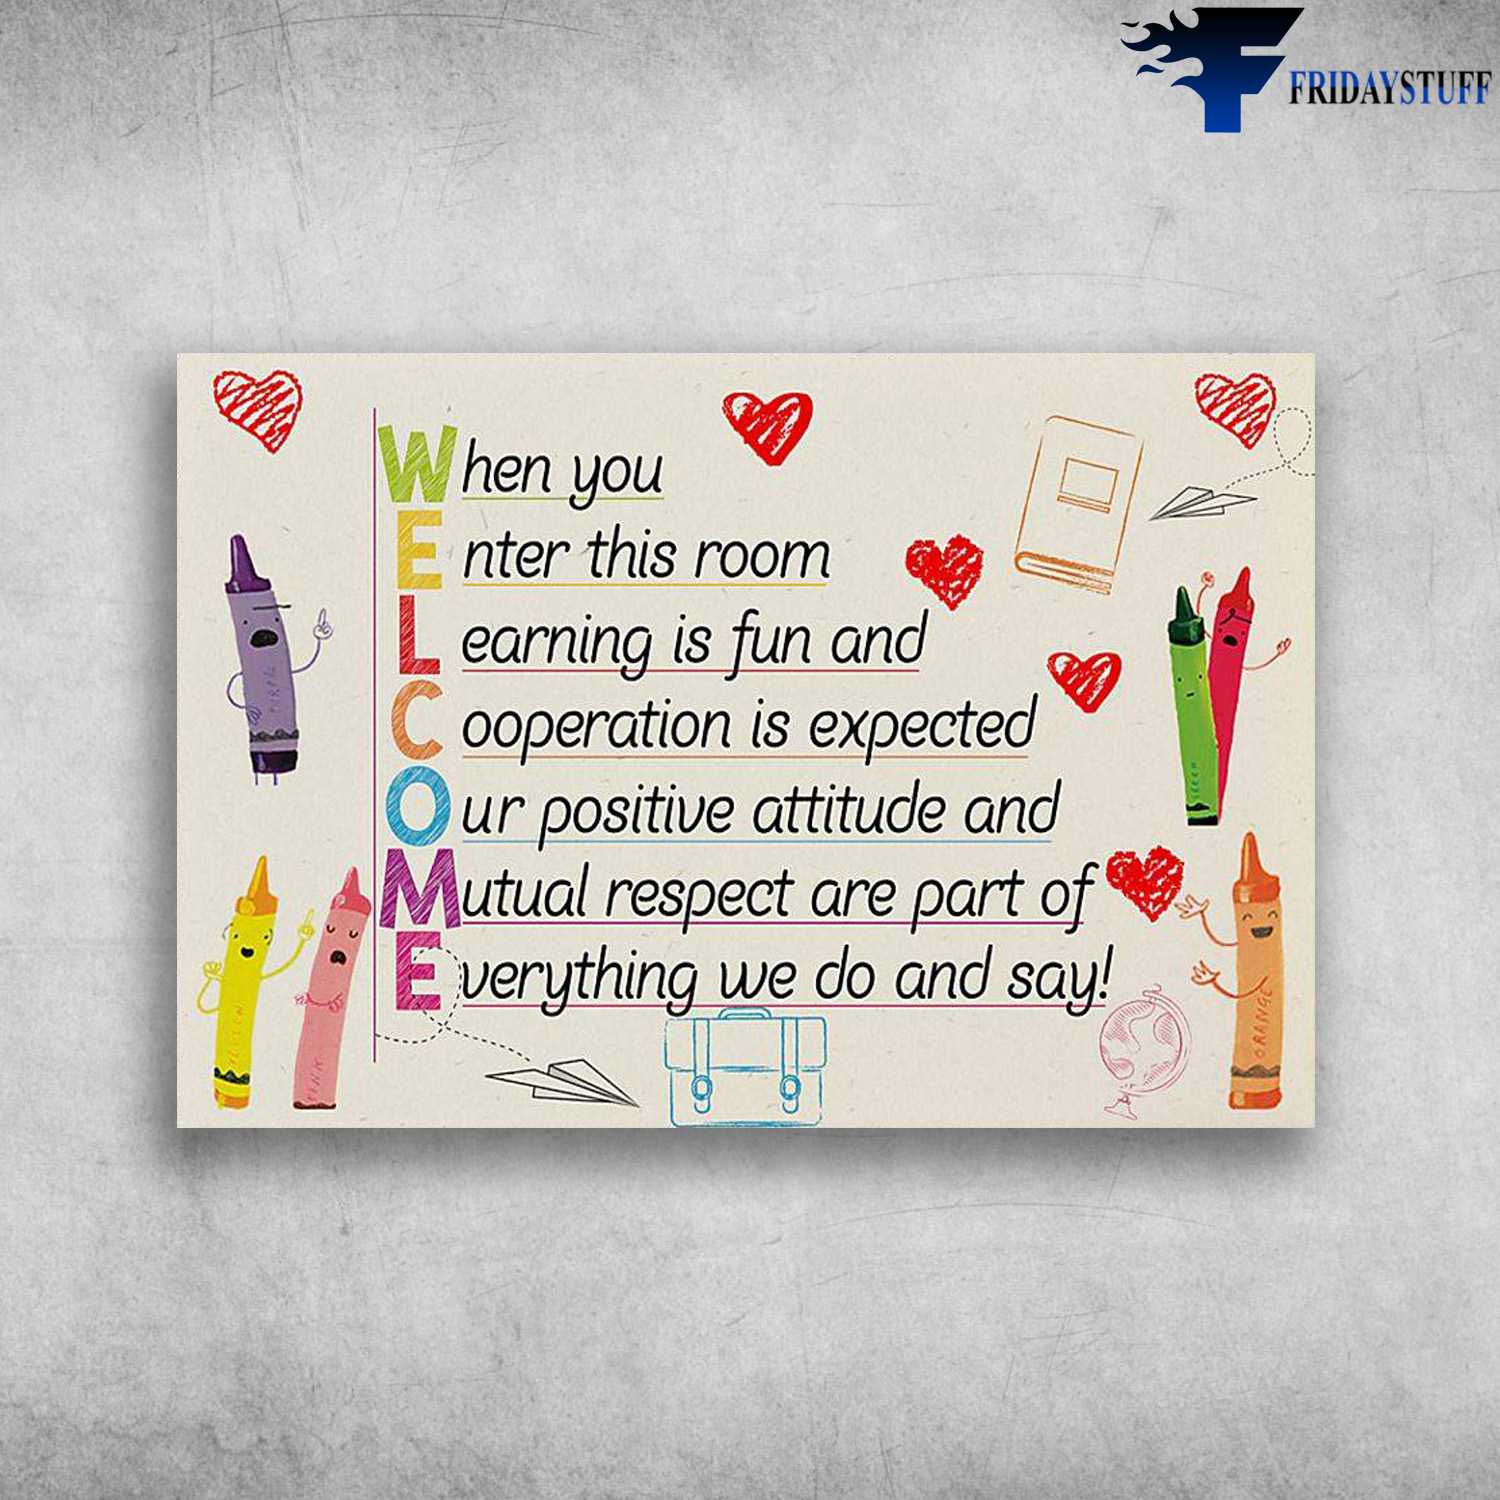 Welcome To Class - When You Enter This Room, Learning Is Ful And, Cooperation Is Expected, Our Positive Attitude And, Mutual Respect Are Part Of, Everything We Do And Say